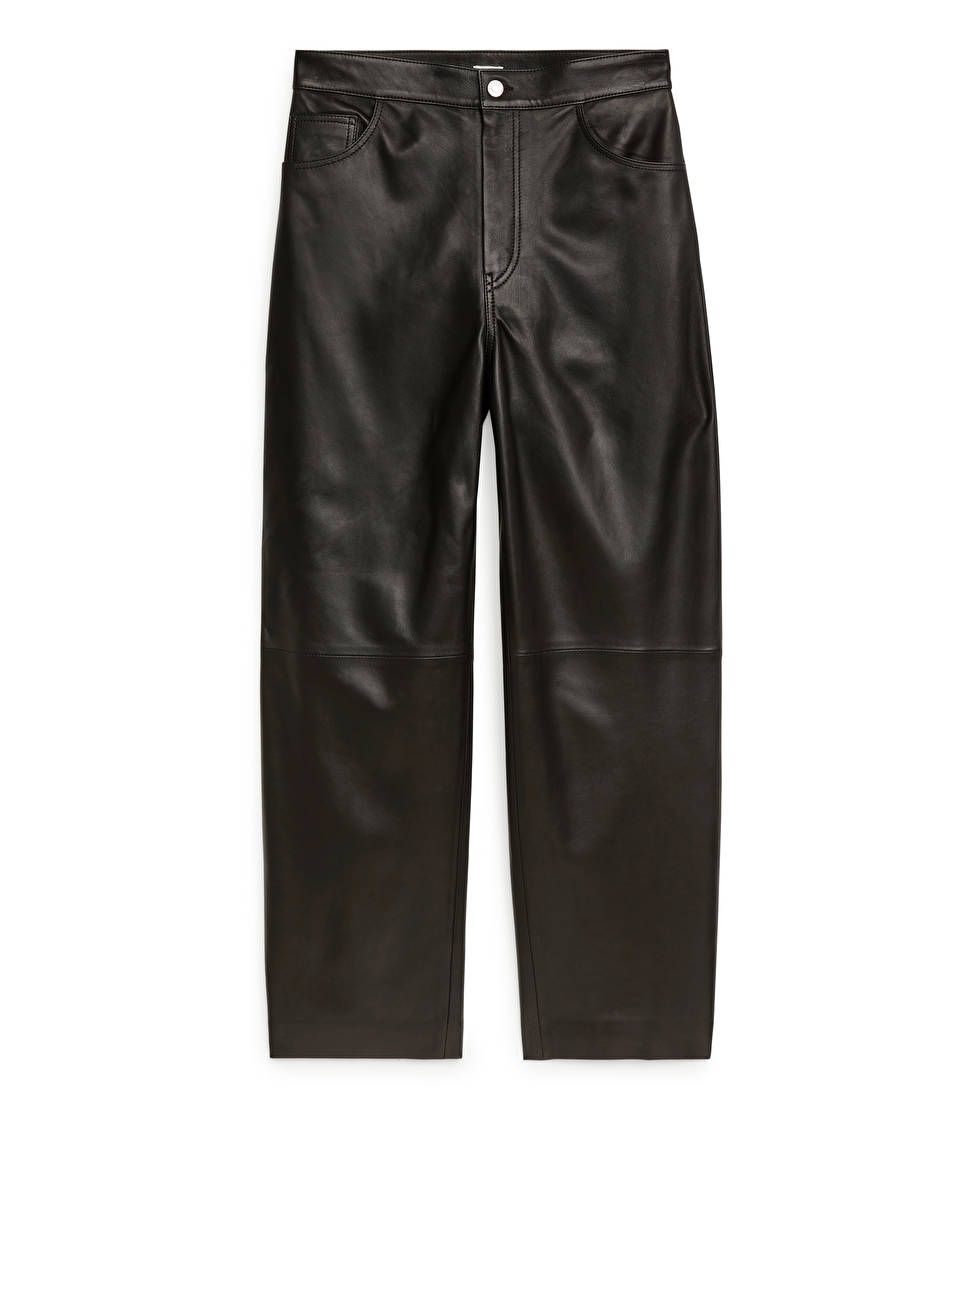 Cropped Leather Trousers - Black - Trousers - ARKET GB | ARKET (US&UK)